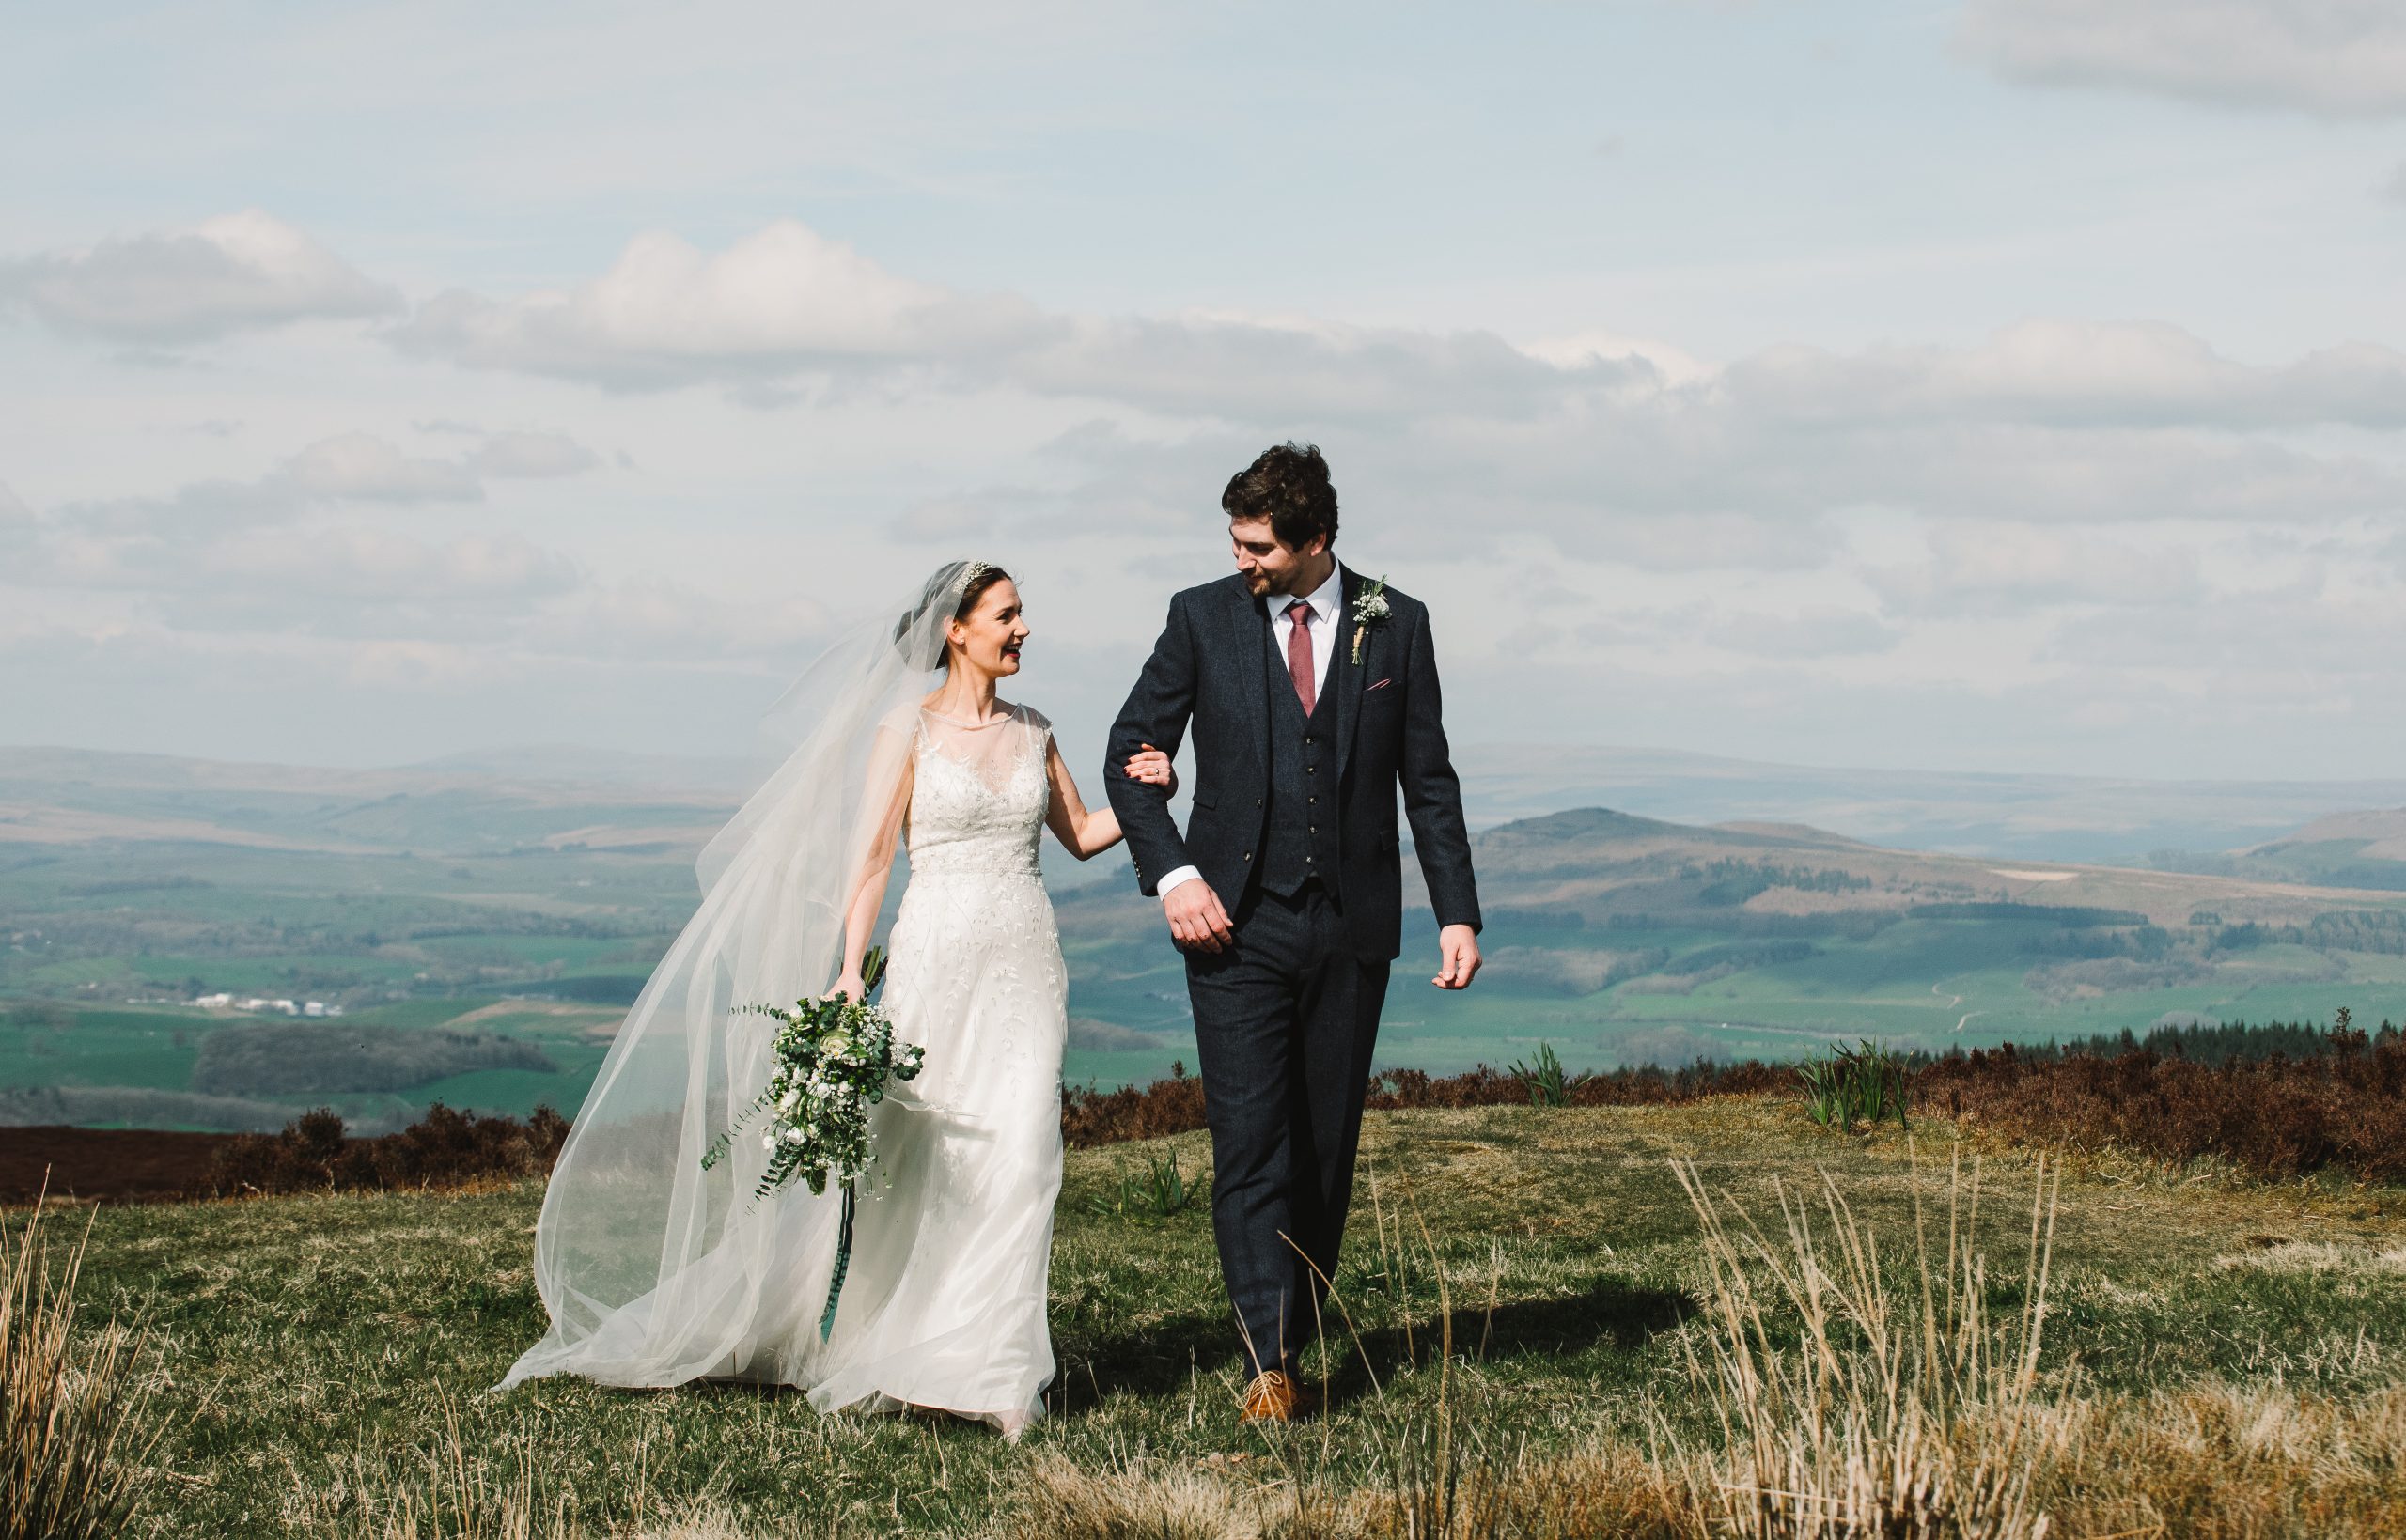 Rustic Yorkshire Barn Wedding Venue - The Tempest Arms, Skipto